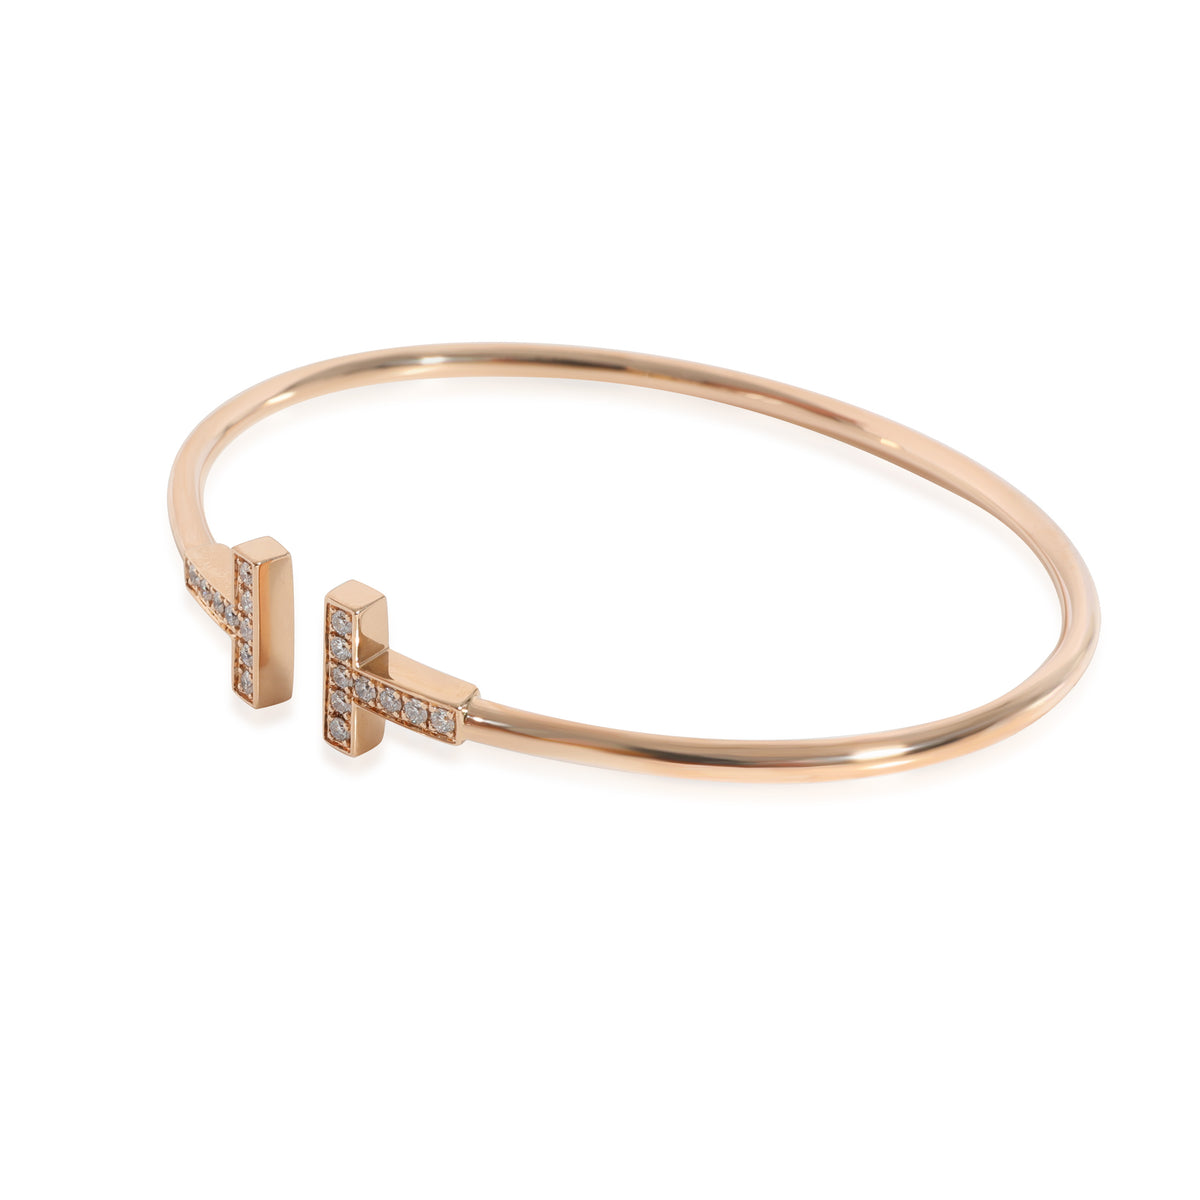 Shop Tiffany & Co. Rose Gold Tiffany T Wide Mother-of-Pearl Wire Bracelet  in 18kt Rose Gold for Women | Ounass UAE | Wire bracelet, Modern bracelets, Tiffany  t